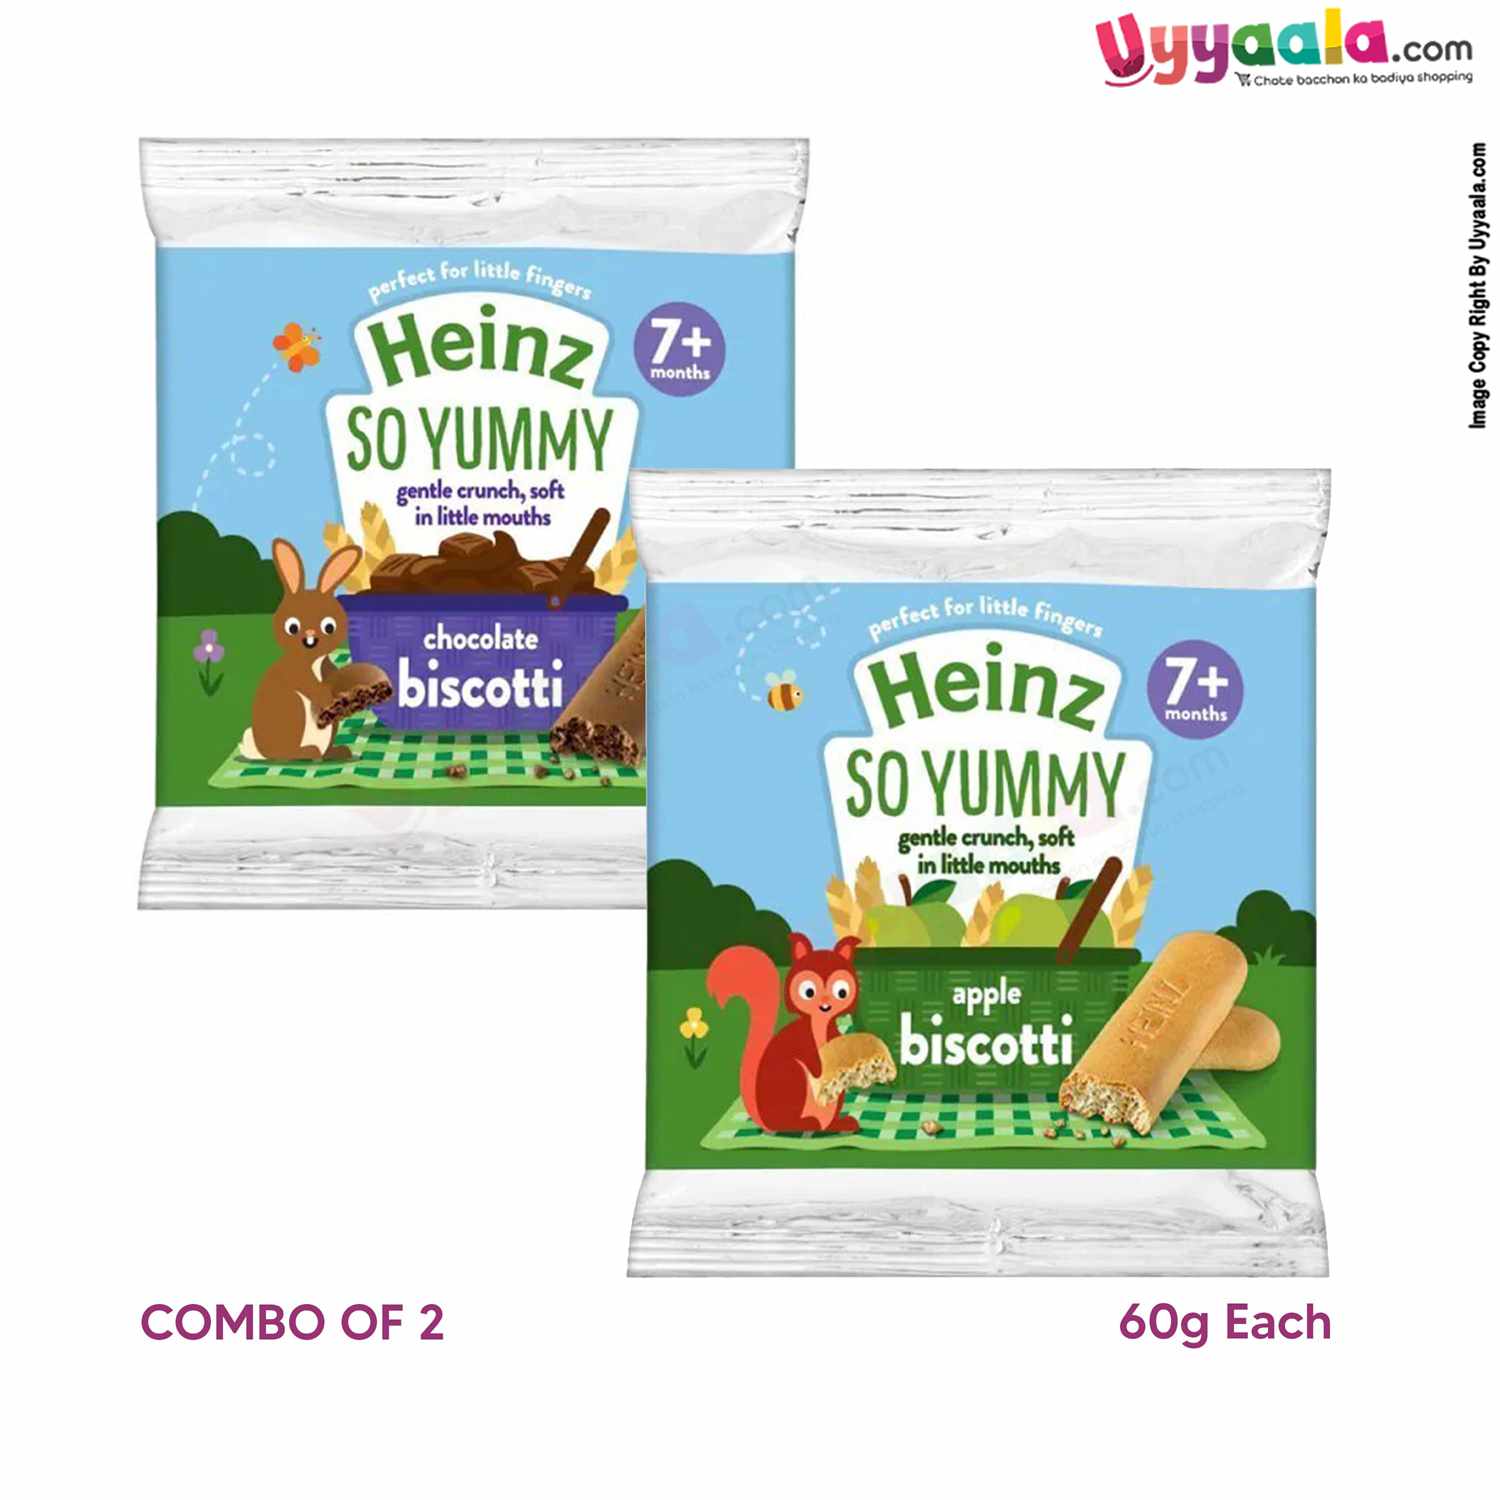 HEINZ SO YUMMY Chocolate & Apple biscotti for Kids snacks Combo of 2 - Chocolate & Apple Biscuits (60 g each)